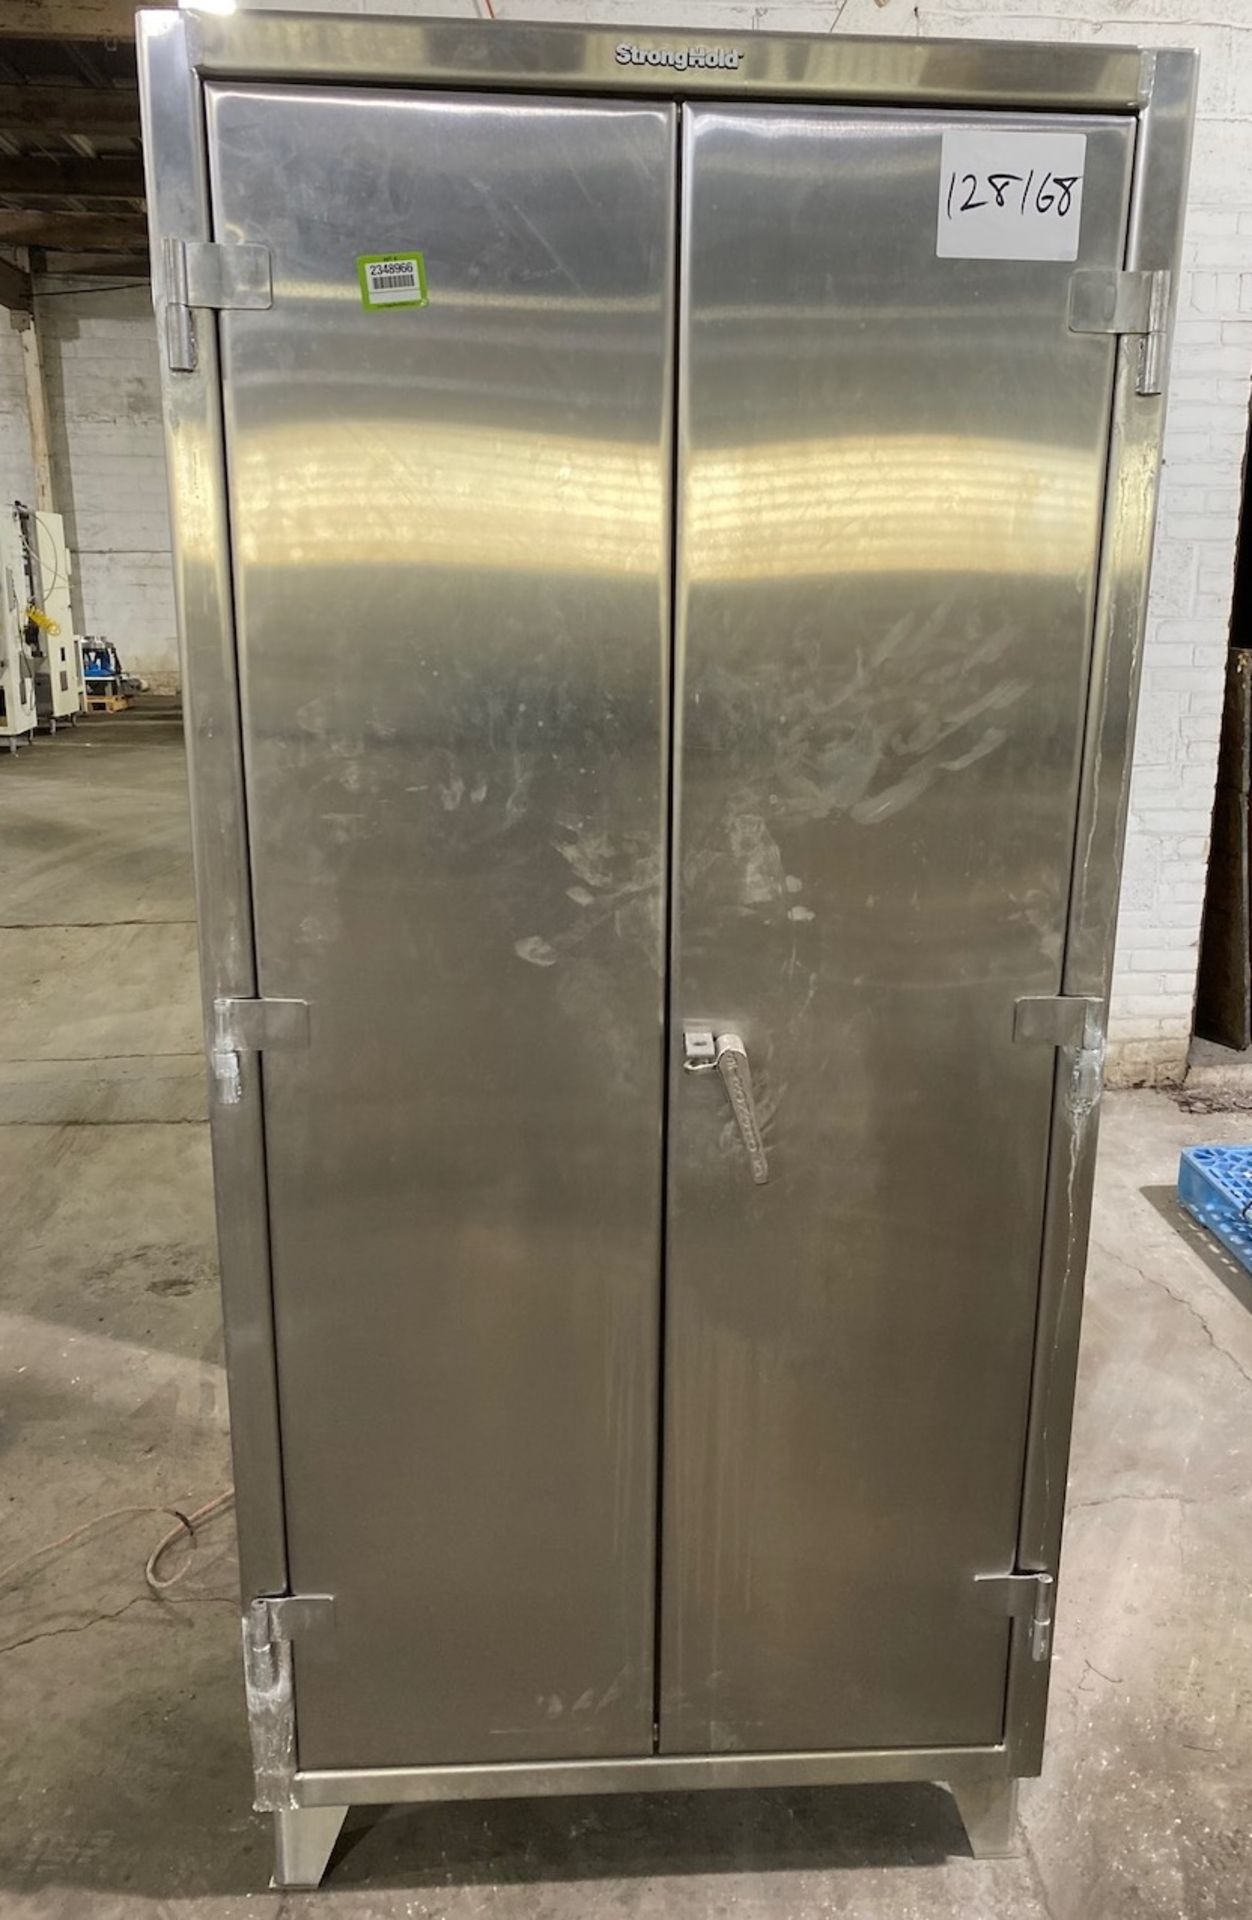 Stronghold Stainless Steel Cabinet